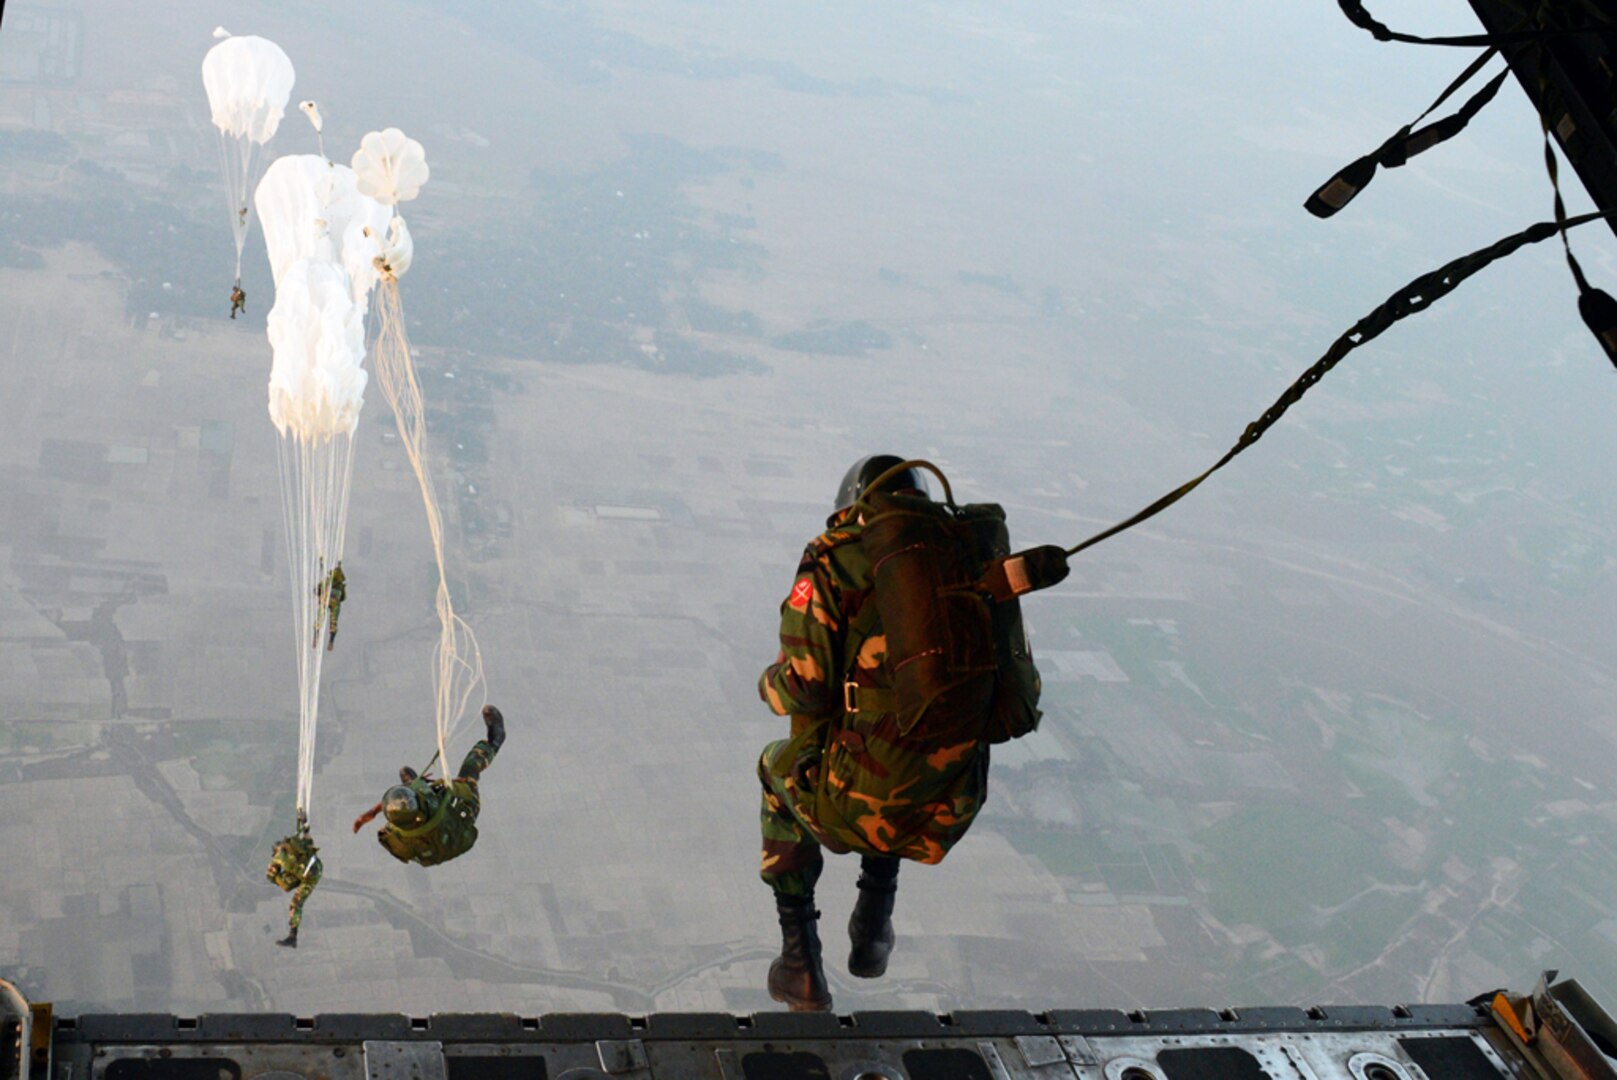 SYLHET INTERNATIONAL AIRPORT, Bangladesh (Jan. 24, 2015) - Bangladeshi commandos jump from a U.S. Air Force C-130H aircraft over a drop zone during Exercise COPE SOUTH near Sylhet.  COPE SOUTH helps cultivate common bonds, foster goodwill and improve readiness and compatibility between members of the Bangladesh and U.S. Air Forces. 